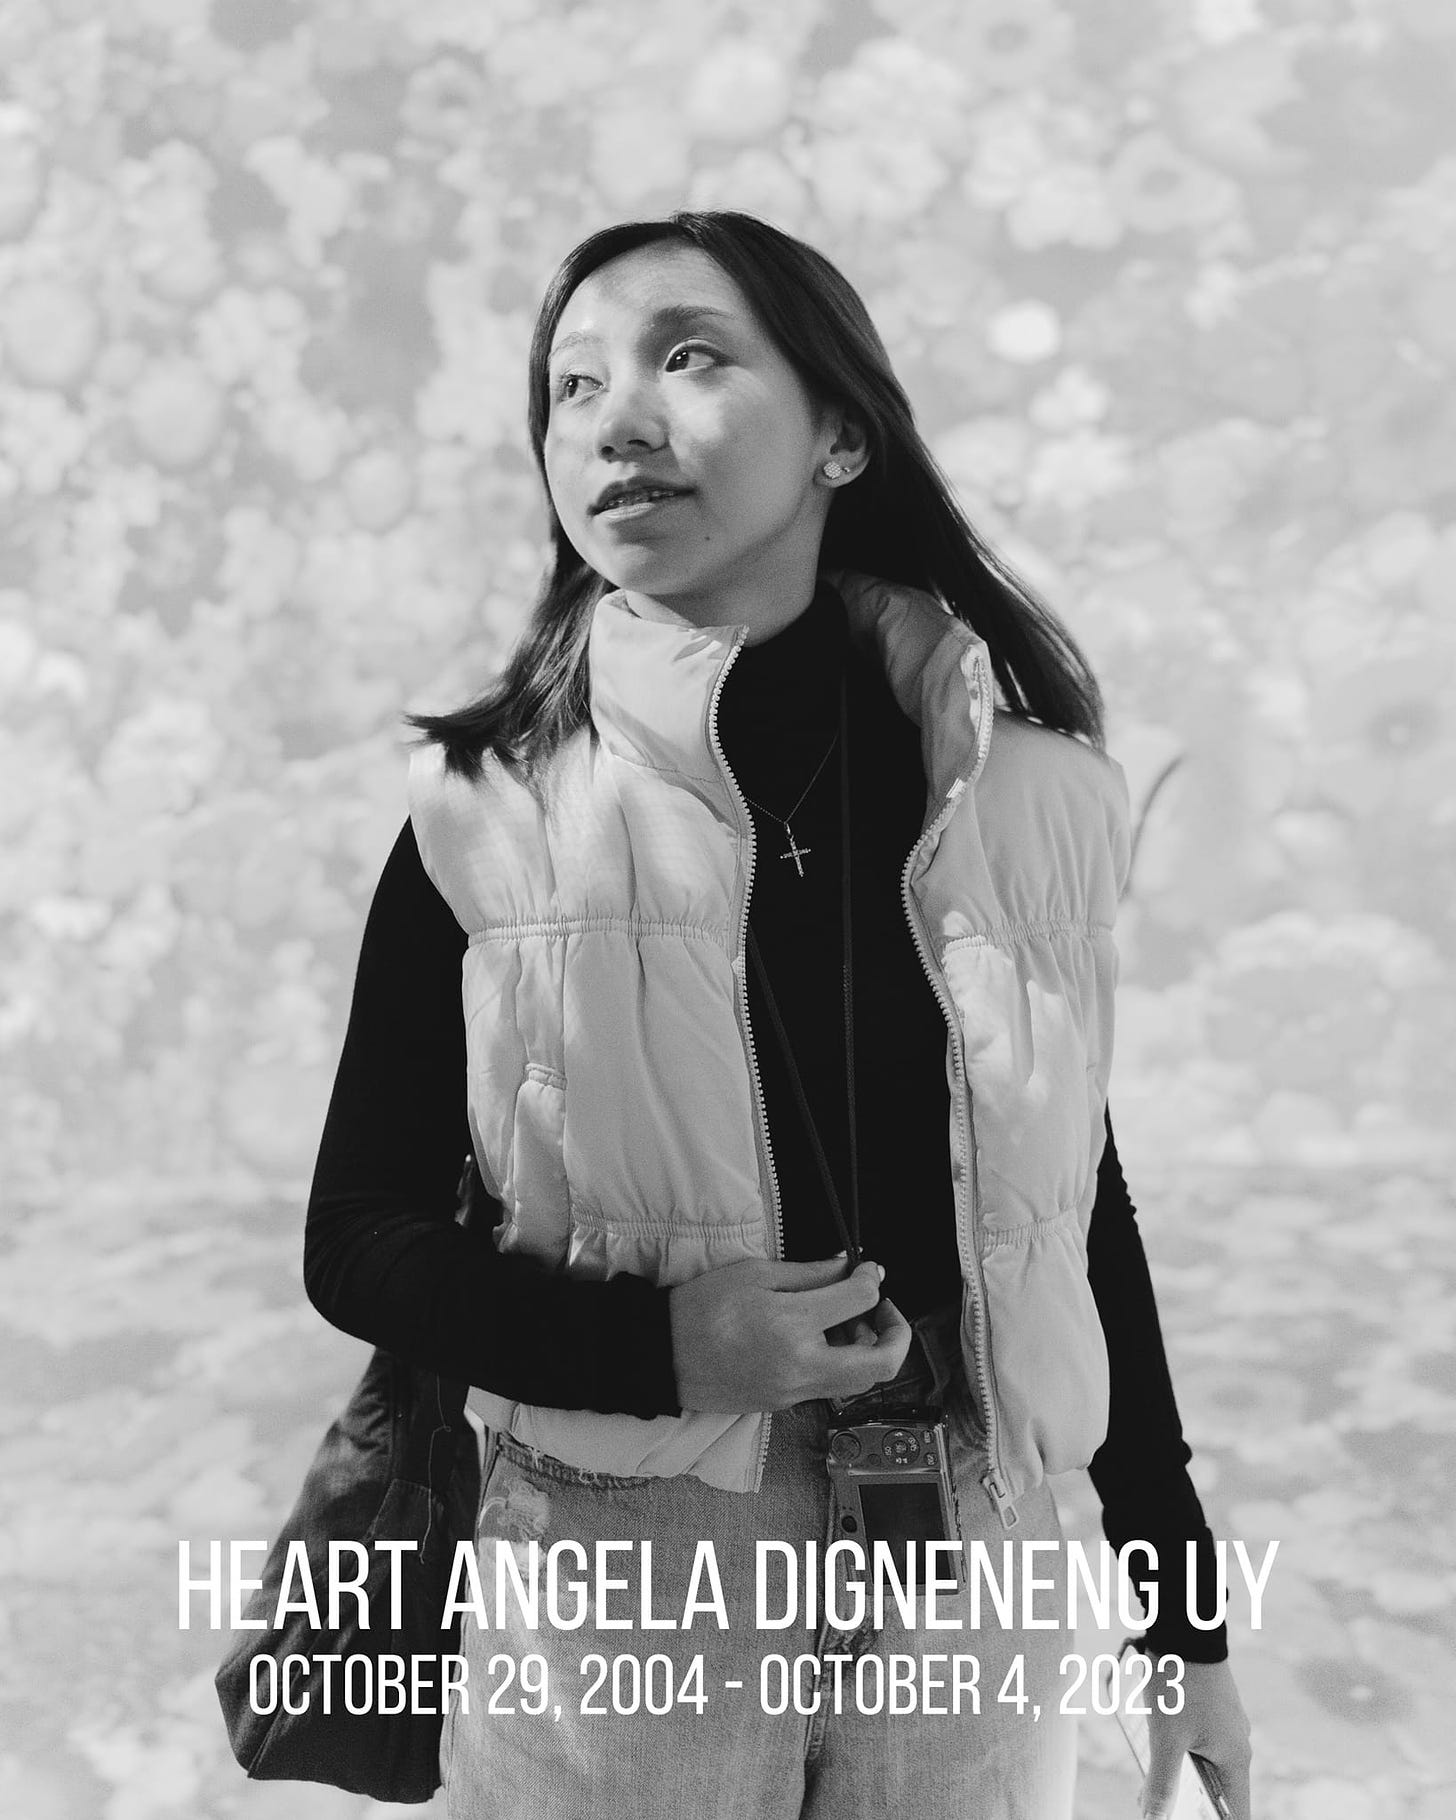 May be a black-and-white image of 1 person, heart and text that says 'HEART ANGELA DIGNENENG UY OCTOBER 29 2004 OCTOBER 4, 2023'